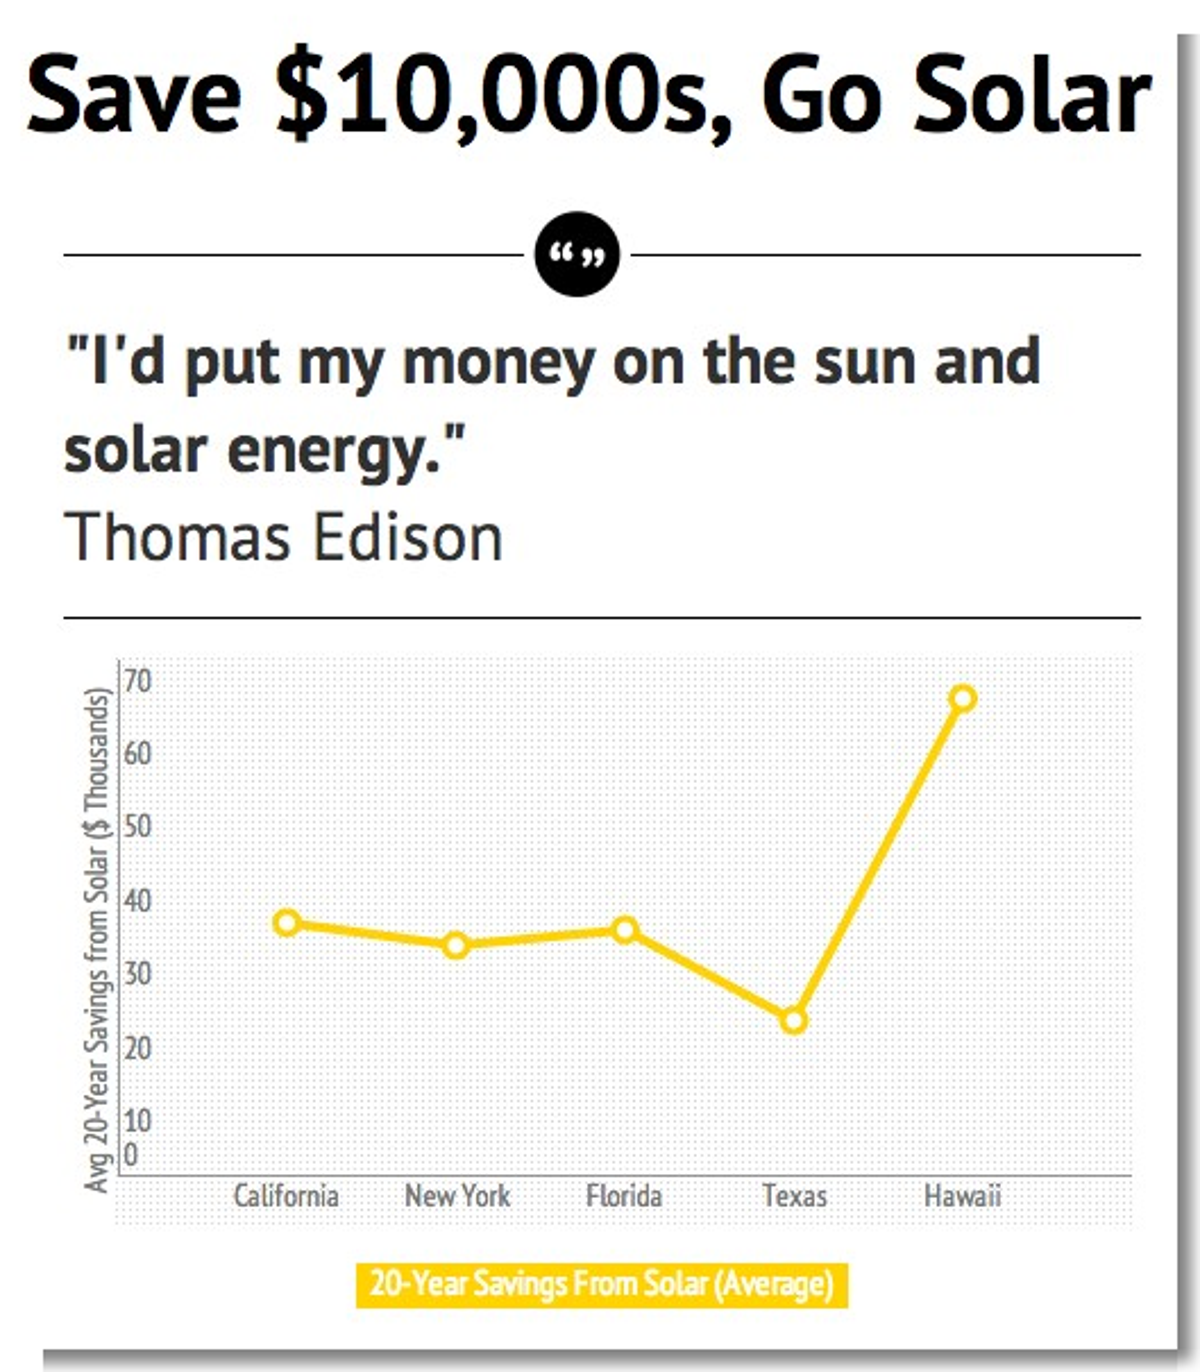 Is switching to solar expensive?